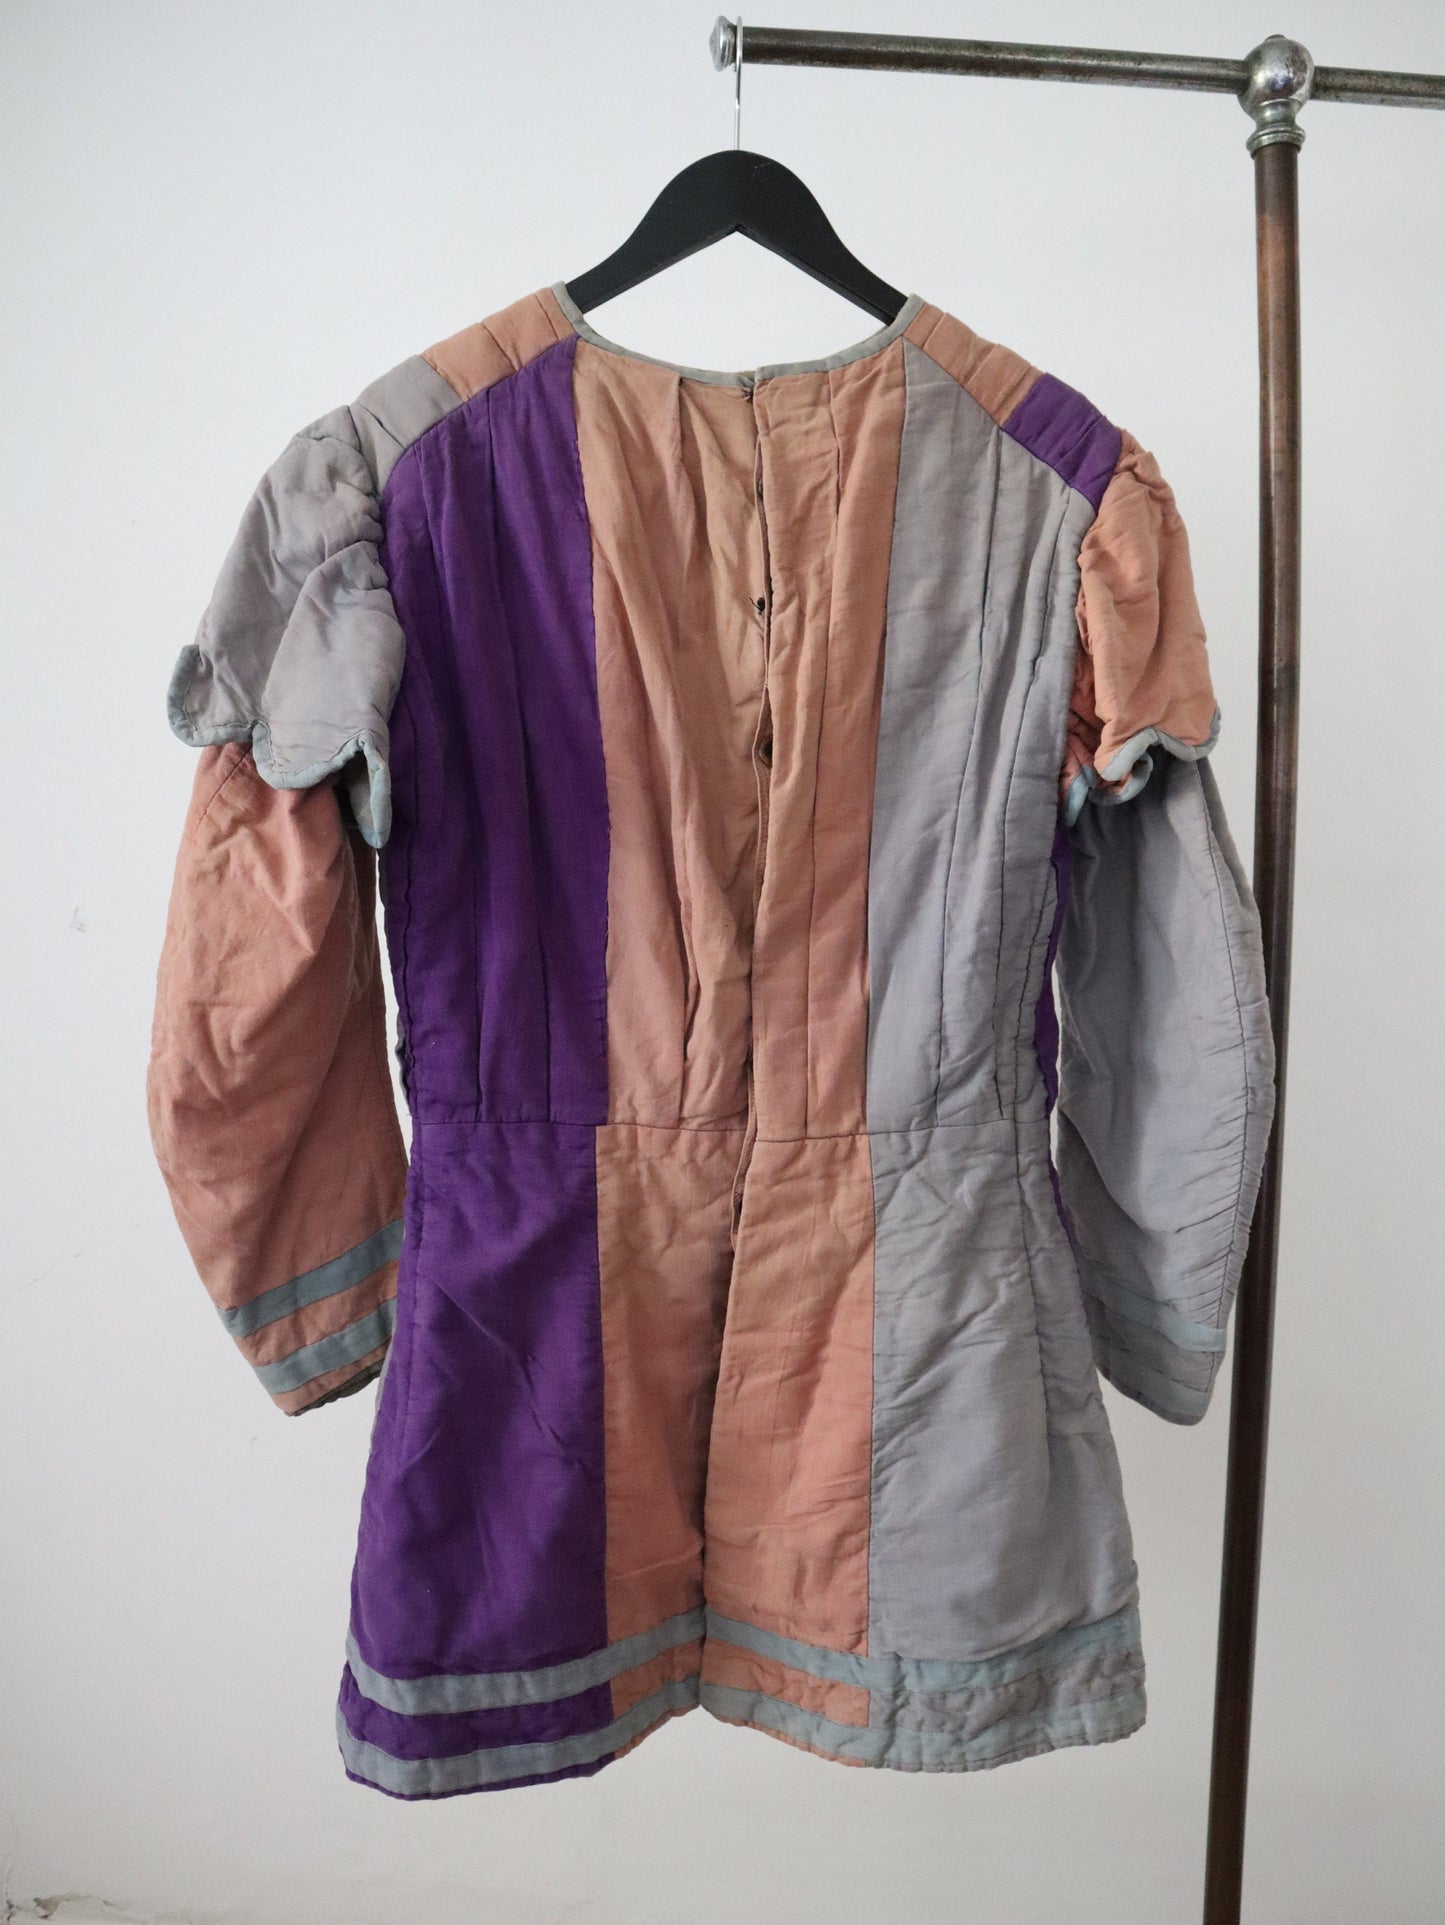 Antique French Theatre Costume Tunic Renaissance Style Pink Grey Purple